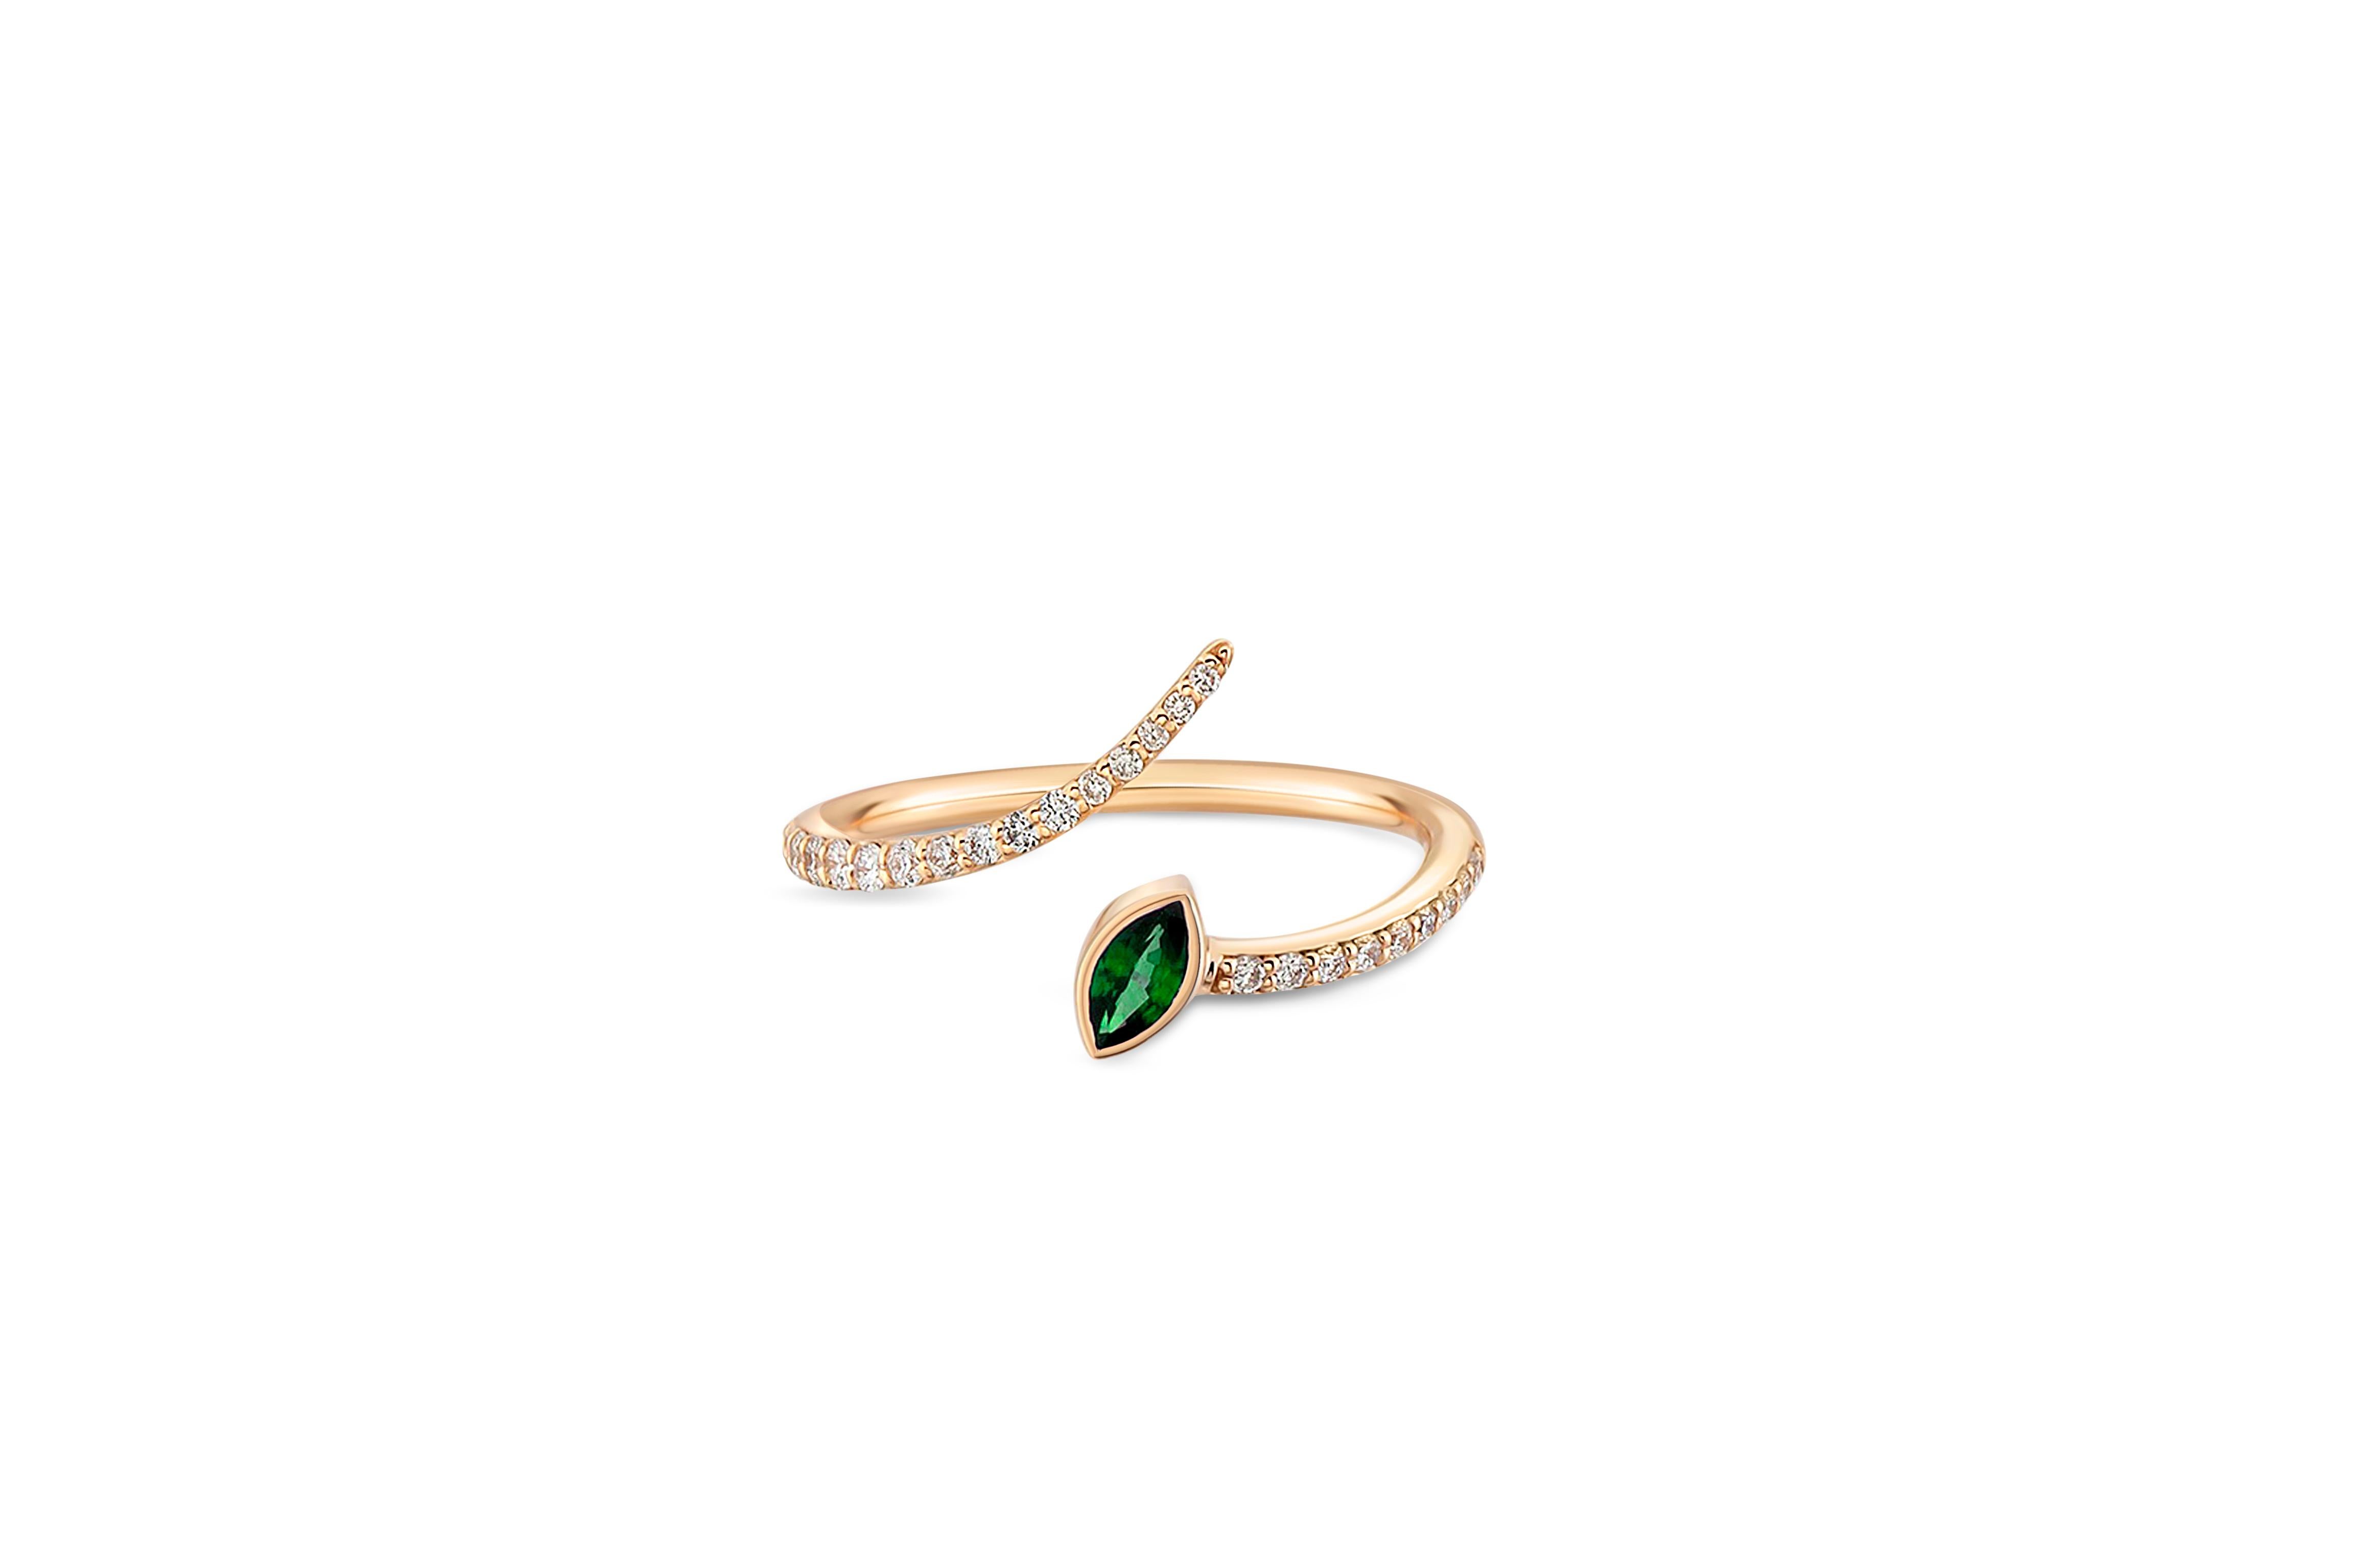  Adjustable green lab emerald marquise 14k gold ring. Open Moissanite and emerald wedding band. Marquise cut Vintage Curved wedding band. Minimalist, everyday wear gold ring. 

Metal: 14k gold
Weight: 2. gr depends from size
Gemstones:
Moissanites: